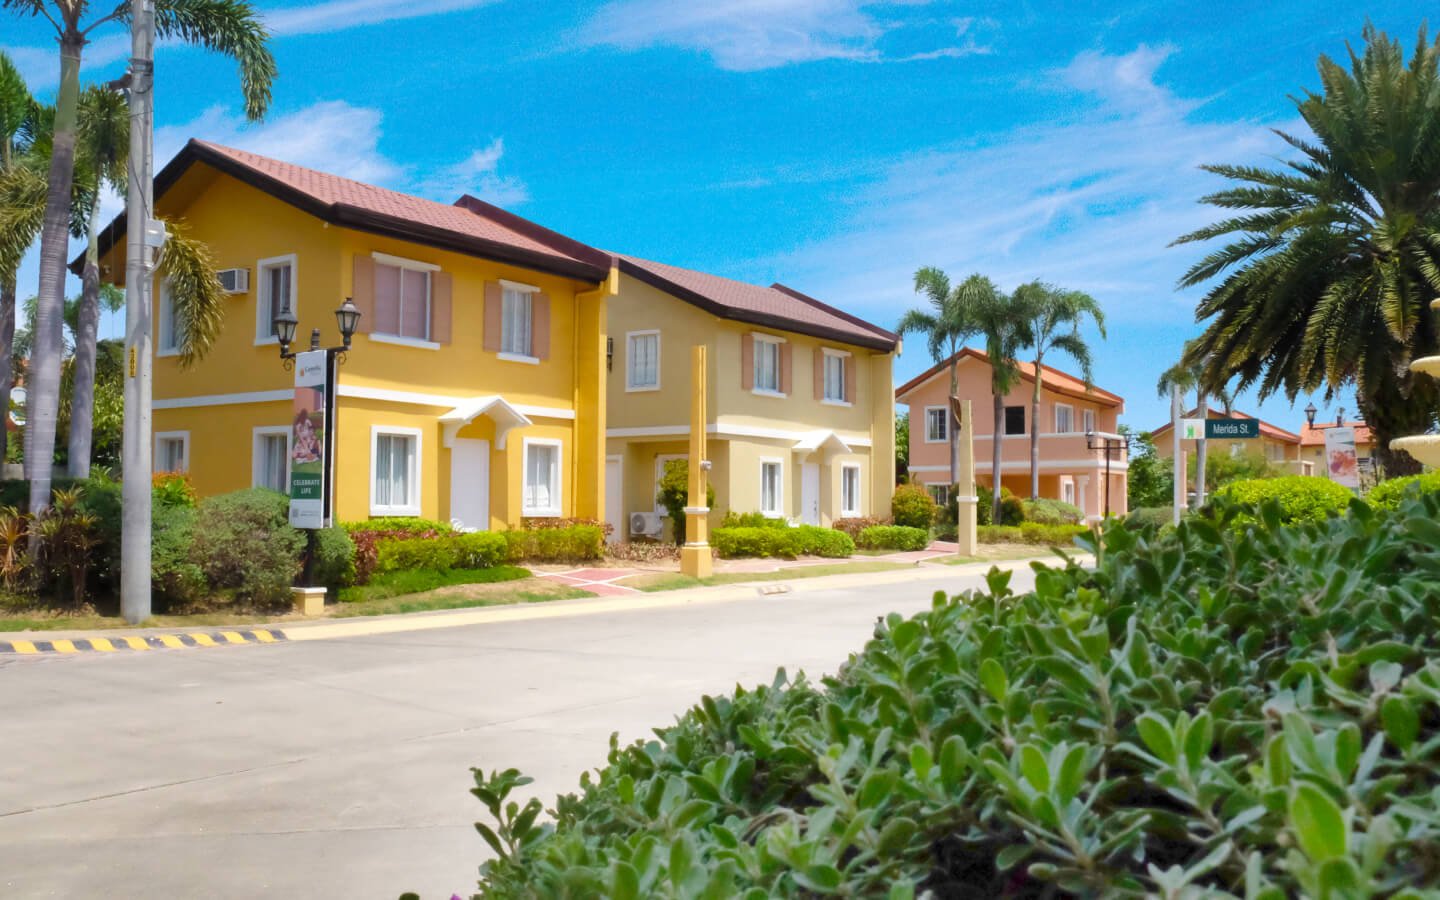 tarlac house for sale in camella homes subdivision in tarlac city